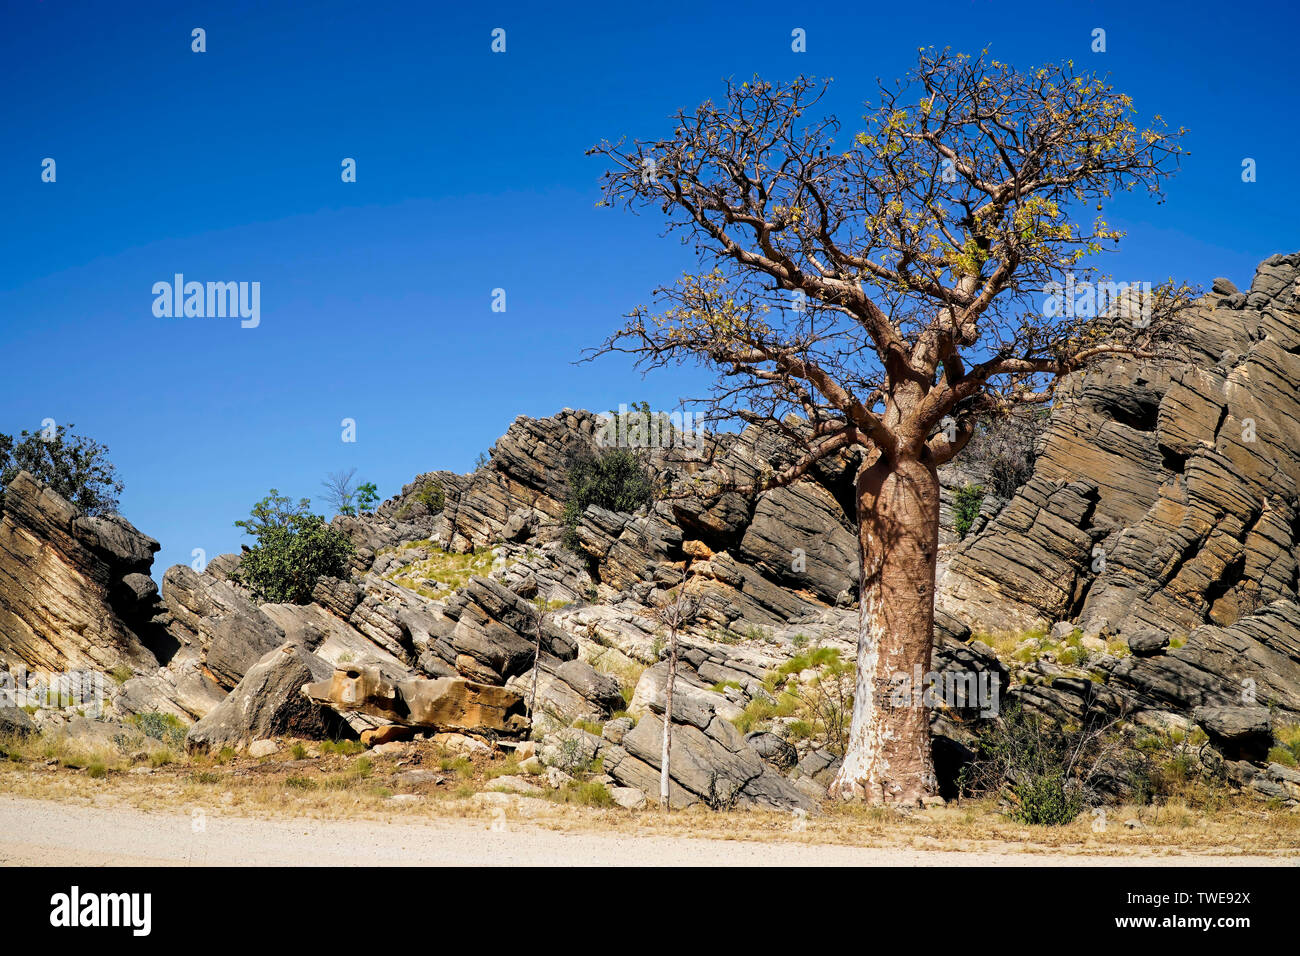 One Boab Tree with large boulders and rocks and blue sky Stock Photo